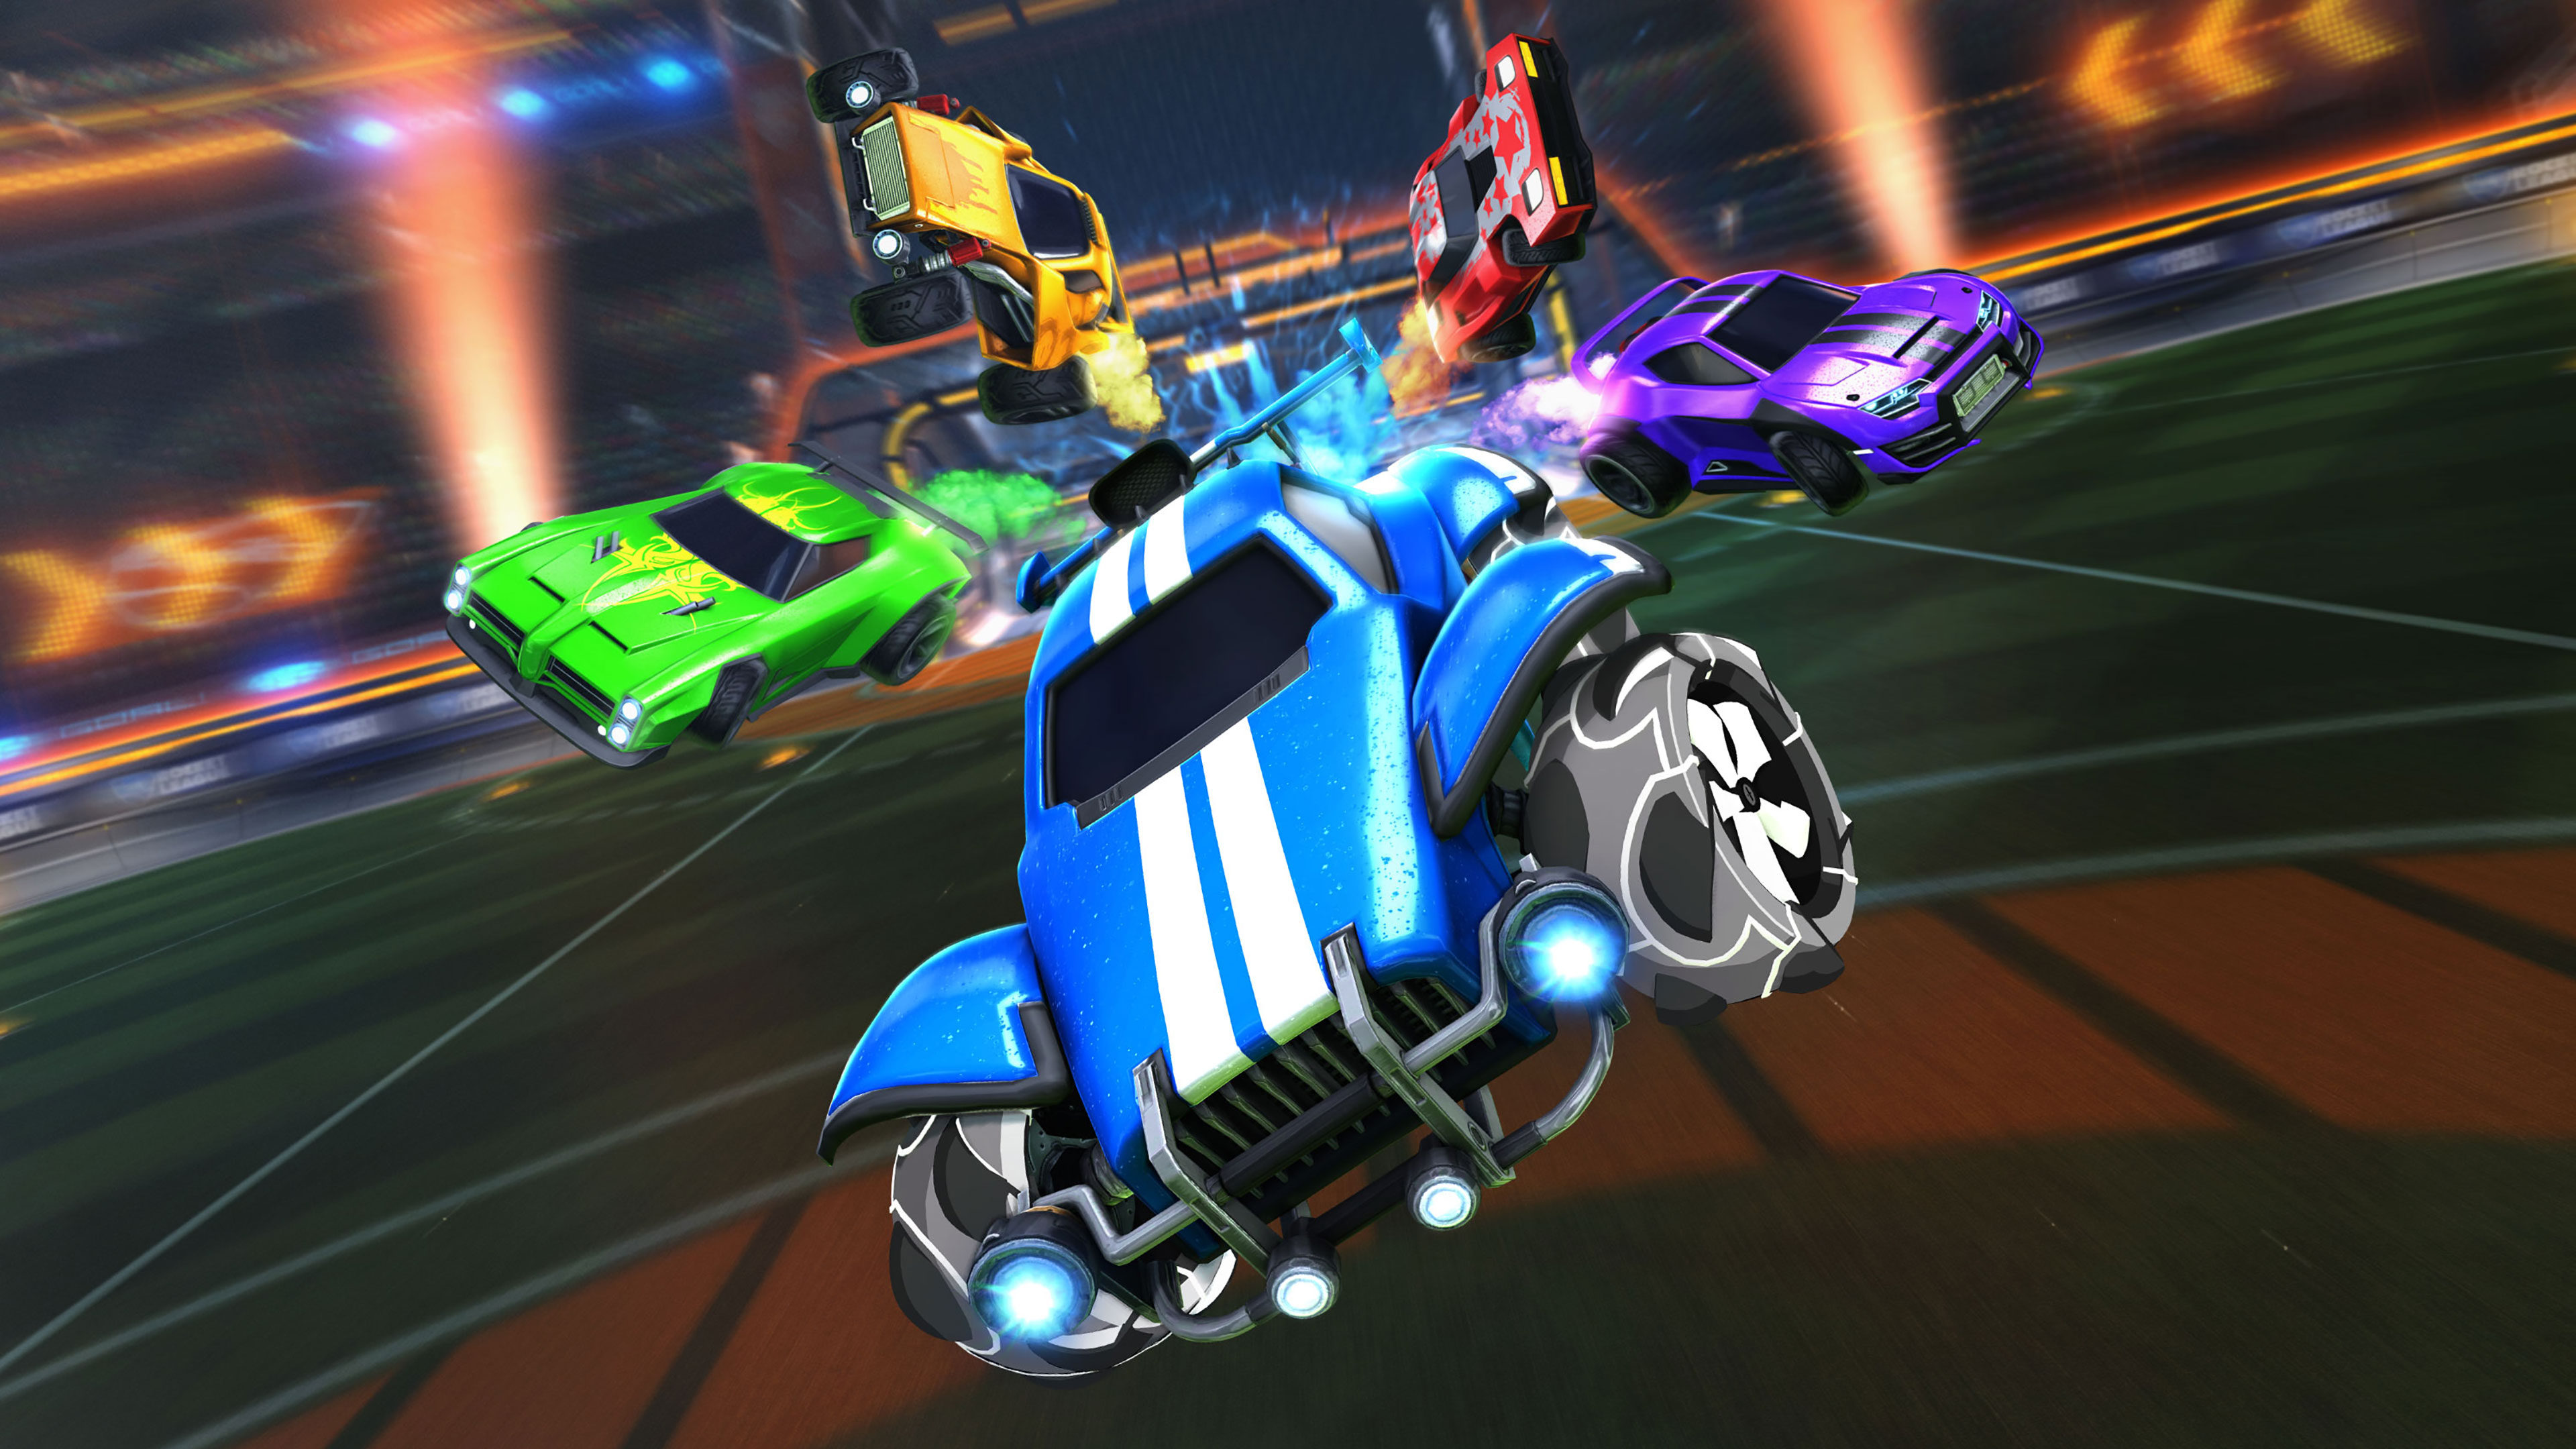 Rocket League: Find Out How to Get Free Credits